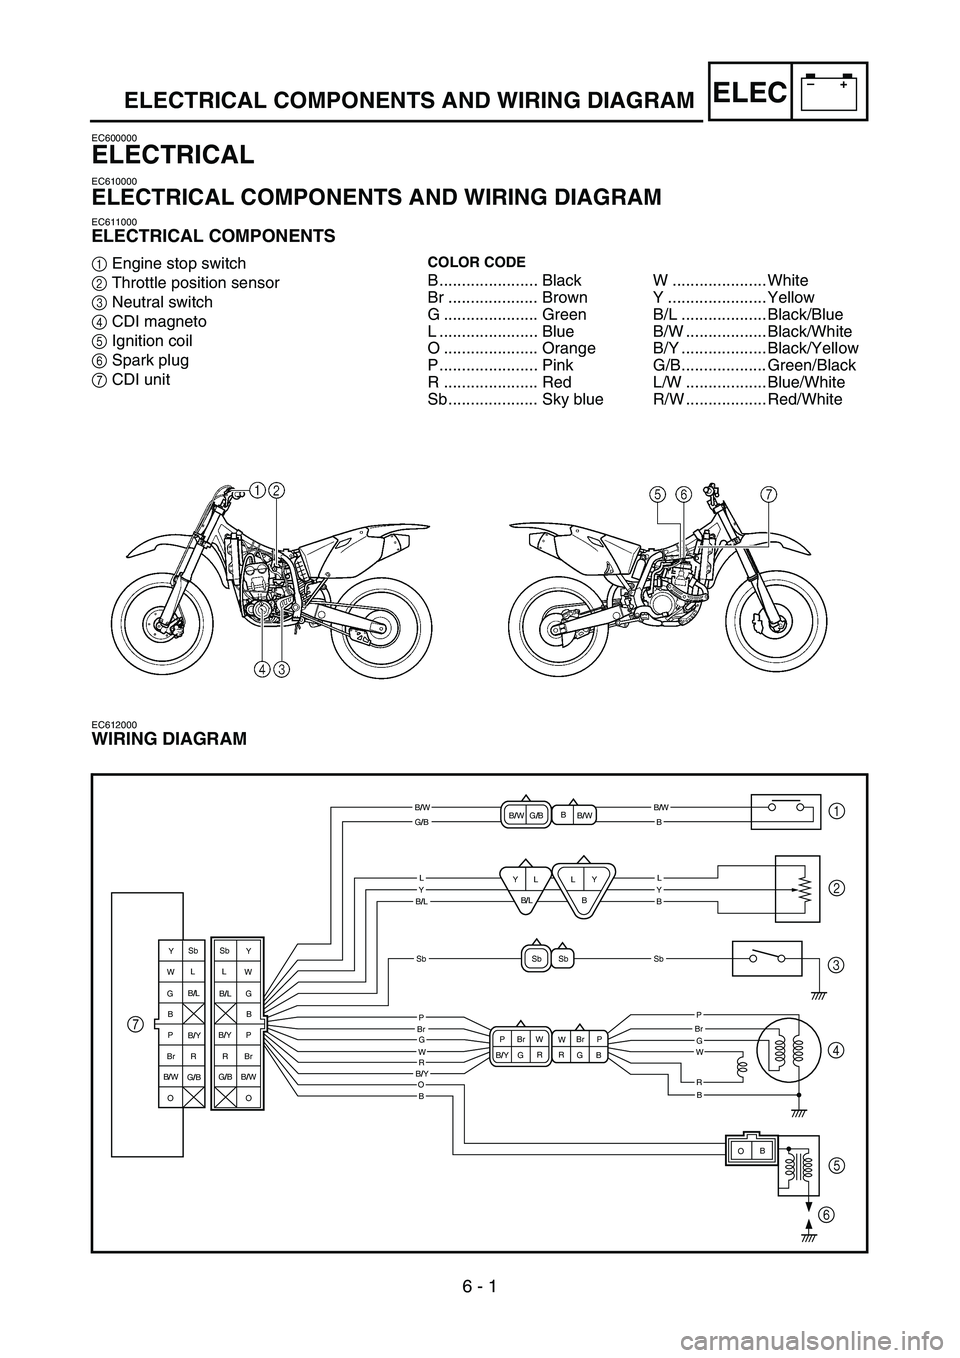 YAMAHA YZ250F 2005  Notices Demploi (in French) 6 - 1
–+ELECELECTRICAL COMPONENTS AND WIRING DIAGRAM
EC600000
ELECTRICAL
EC610000
ELECTRICAL COMPONENTS AND WIRING DIAGRAM
EC611000
ELECTRICAL COMPONENTS
1Engine stop switch
2Throttle position senso